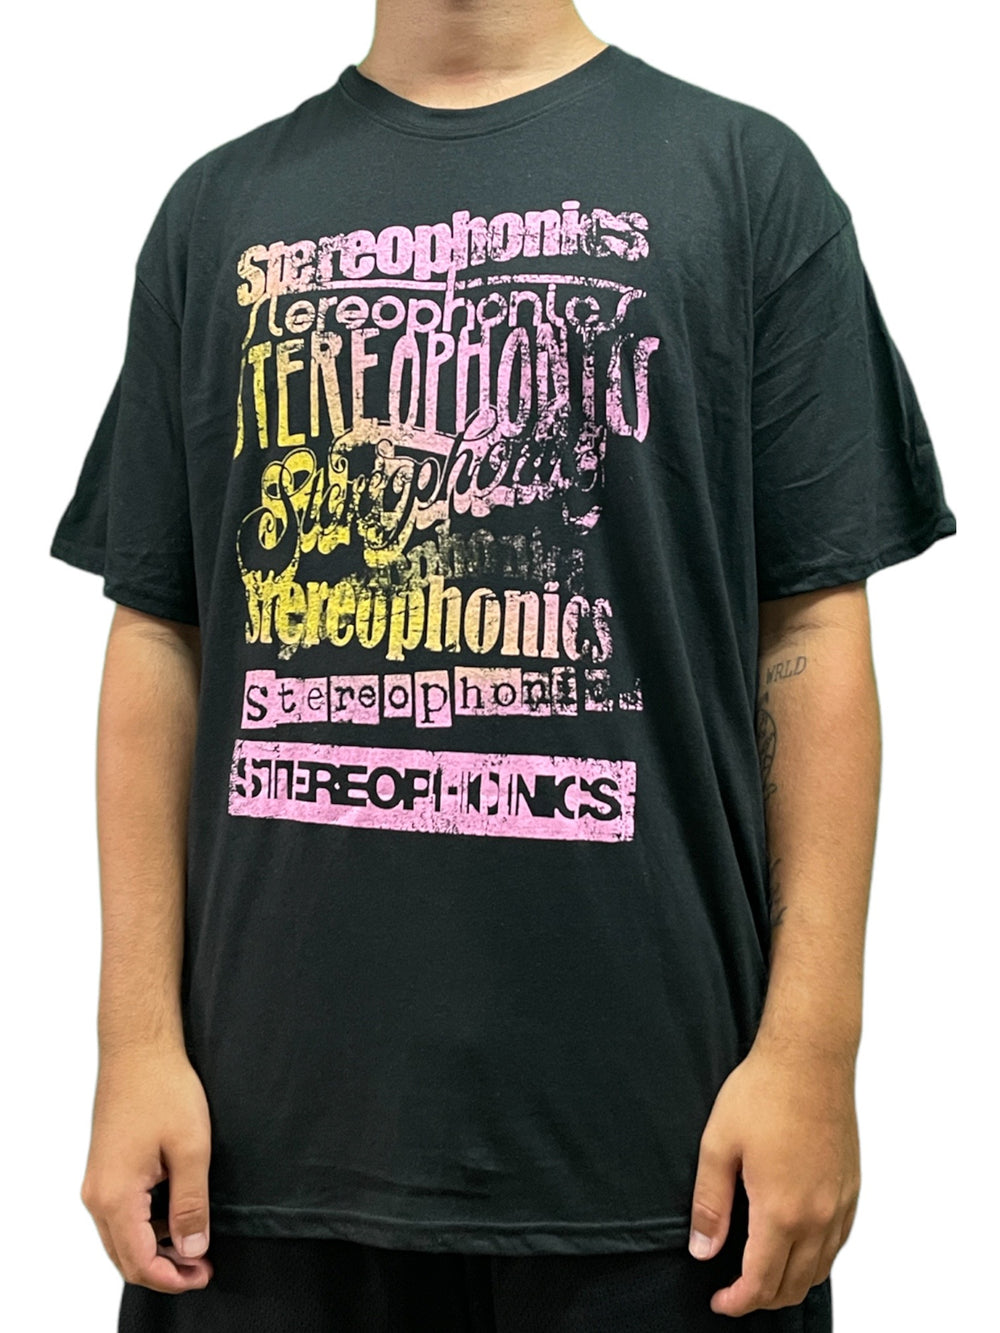 Stereophonics LOGOS Unisex Official T Shirt Brand New Various Sizes